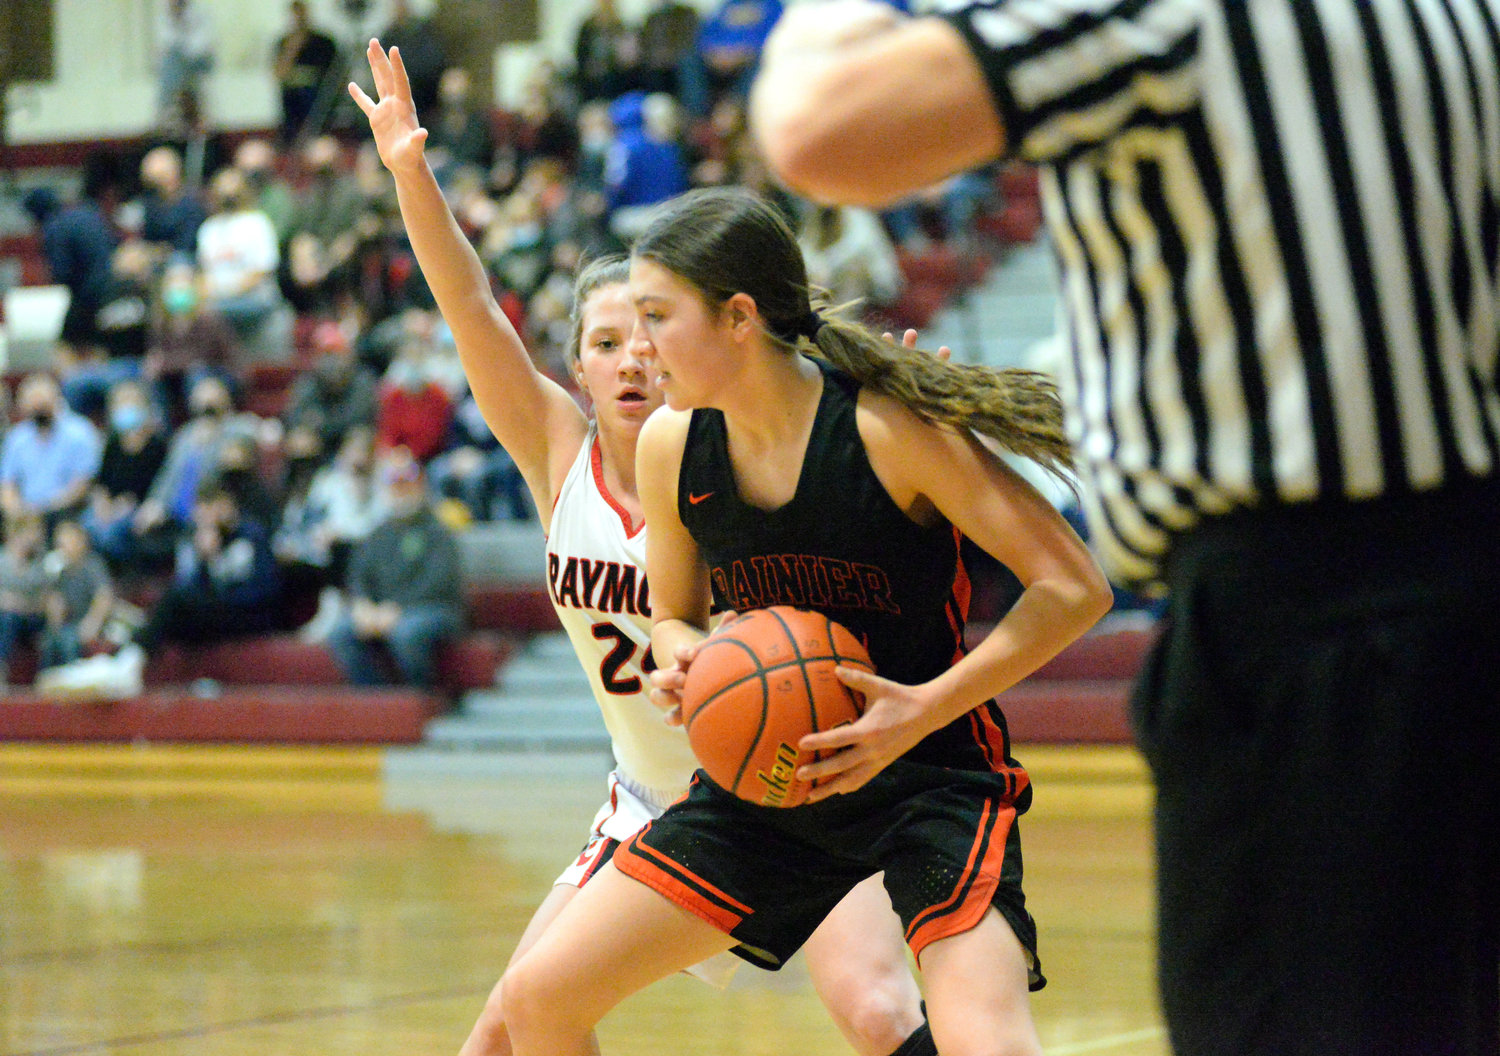 Rainier's Olivia Earsley (14) and Bryn Beckman (24) defend a shot against Raymond's Kyra Gardner during the Mountaineers' 49-32 loss in the 2B District 4 quarterfinals on Tuesday in Montesano.